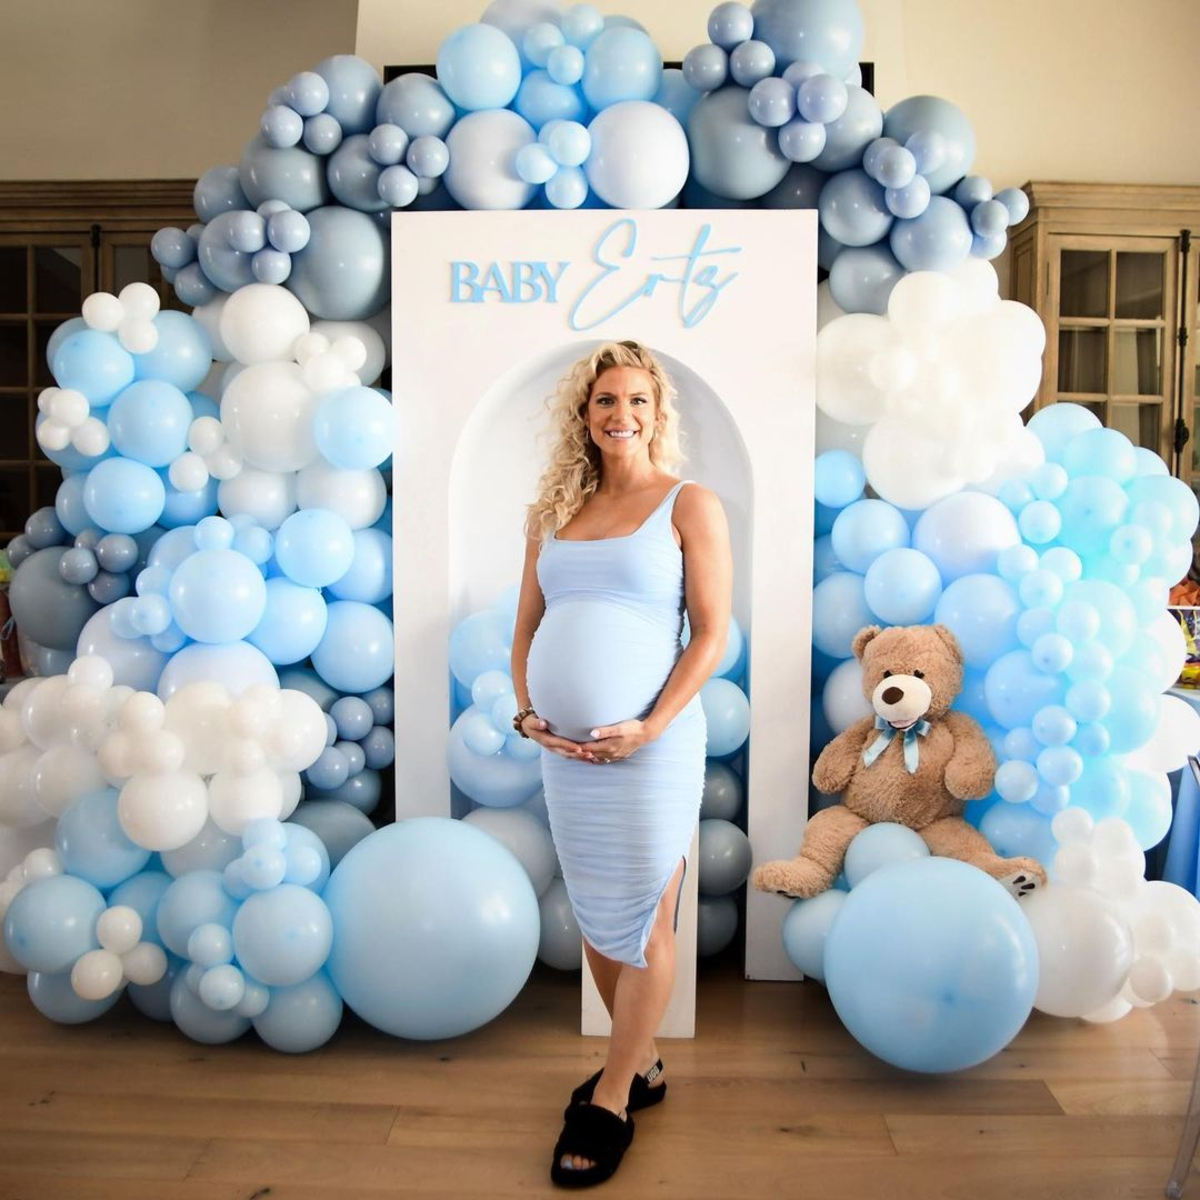 from Baby Showers - E!